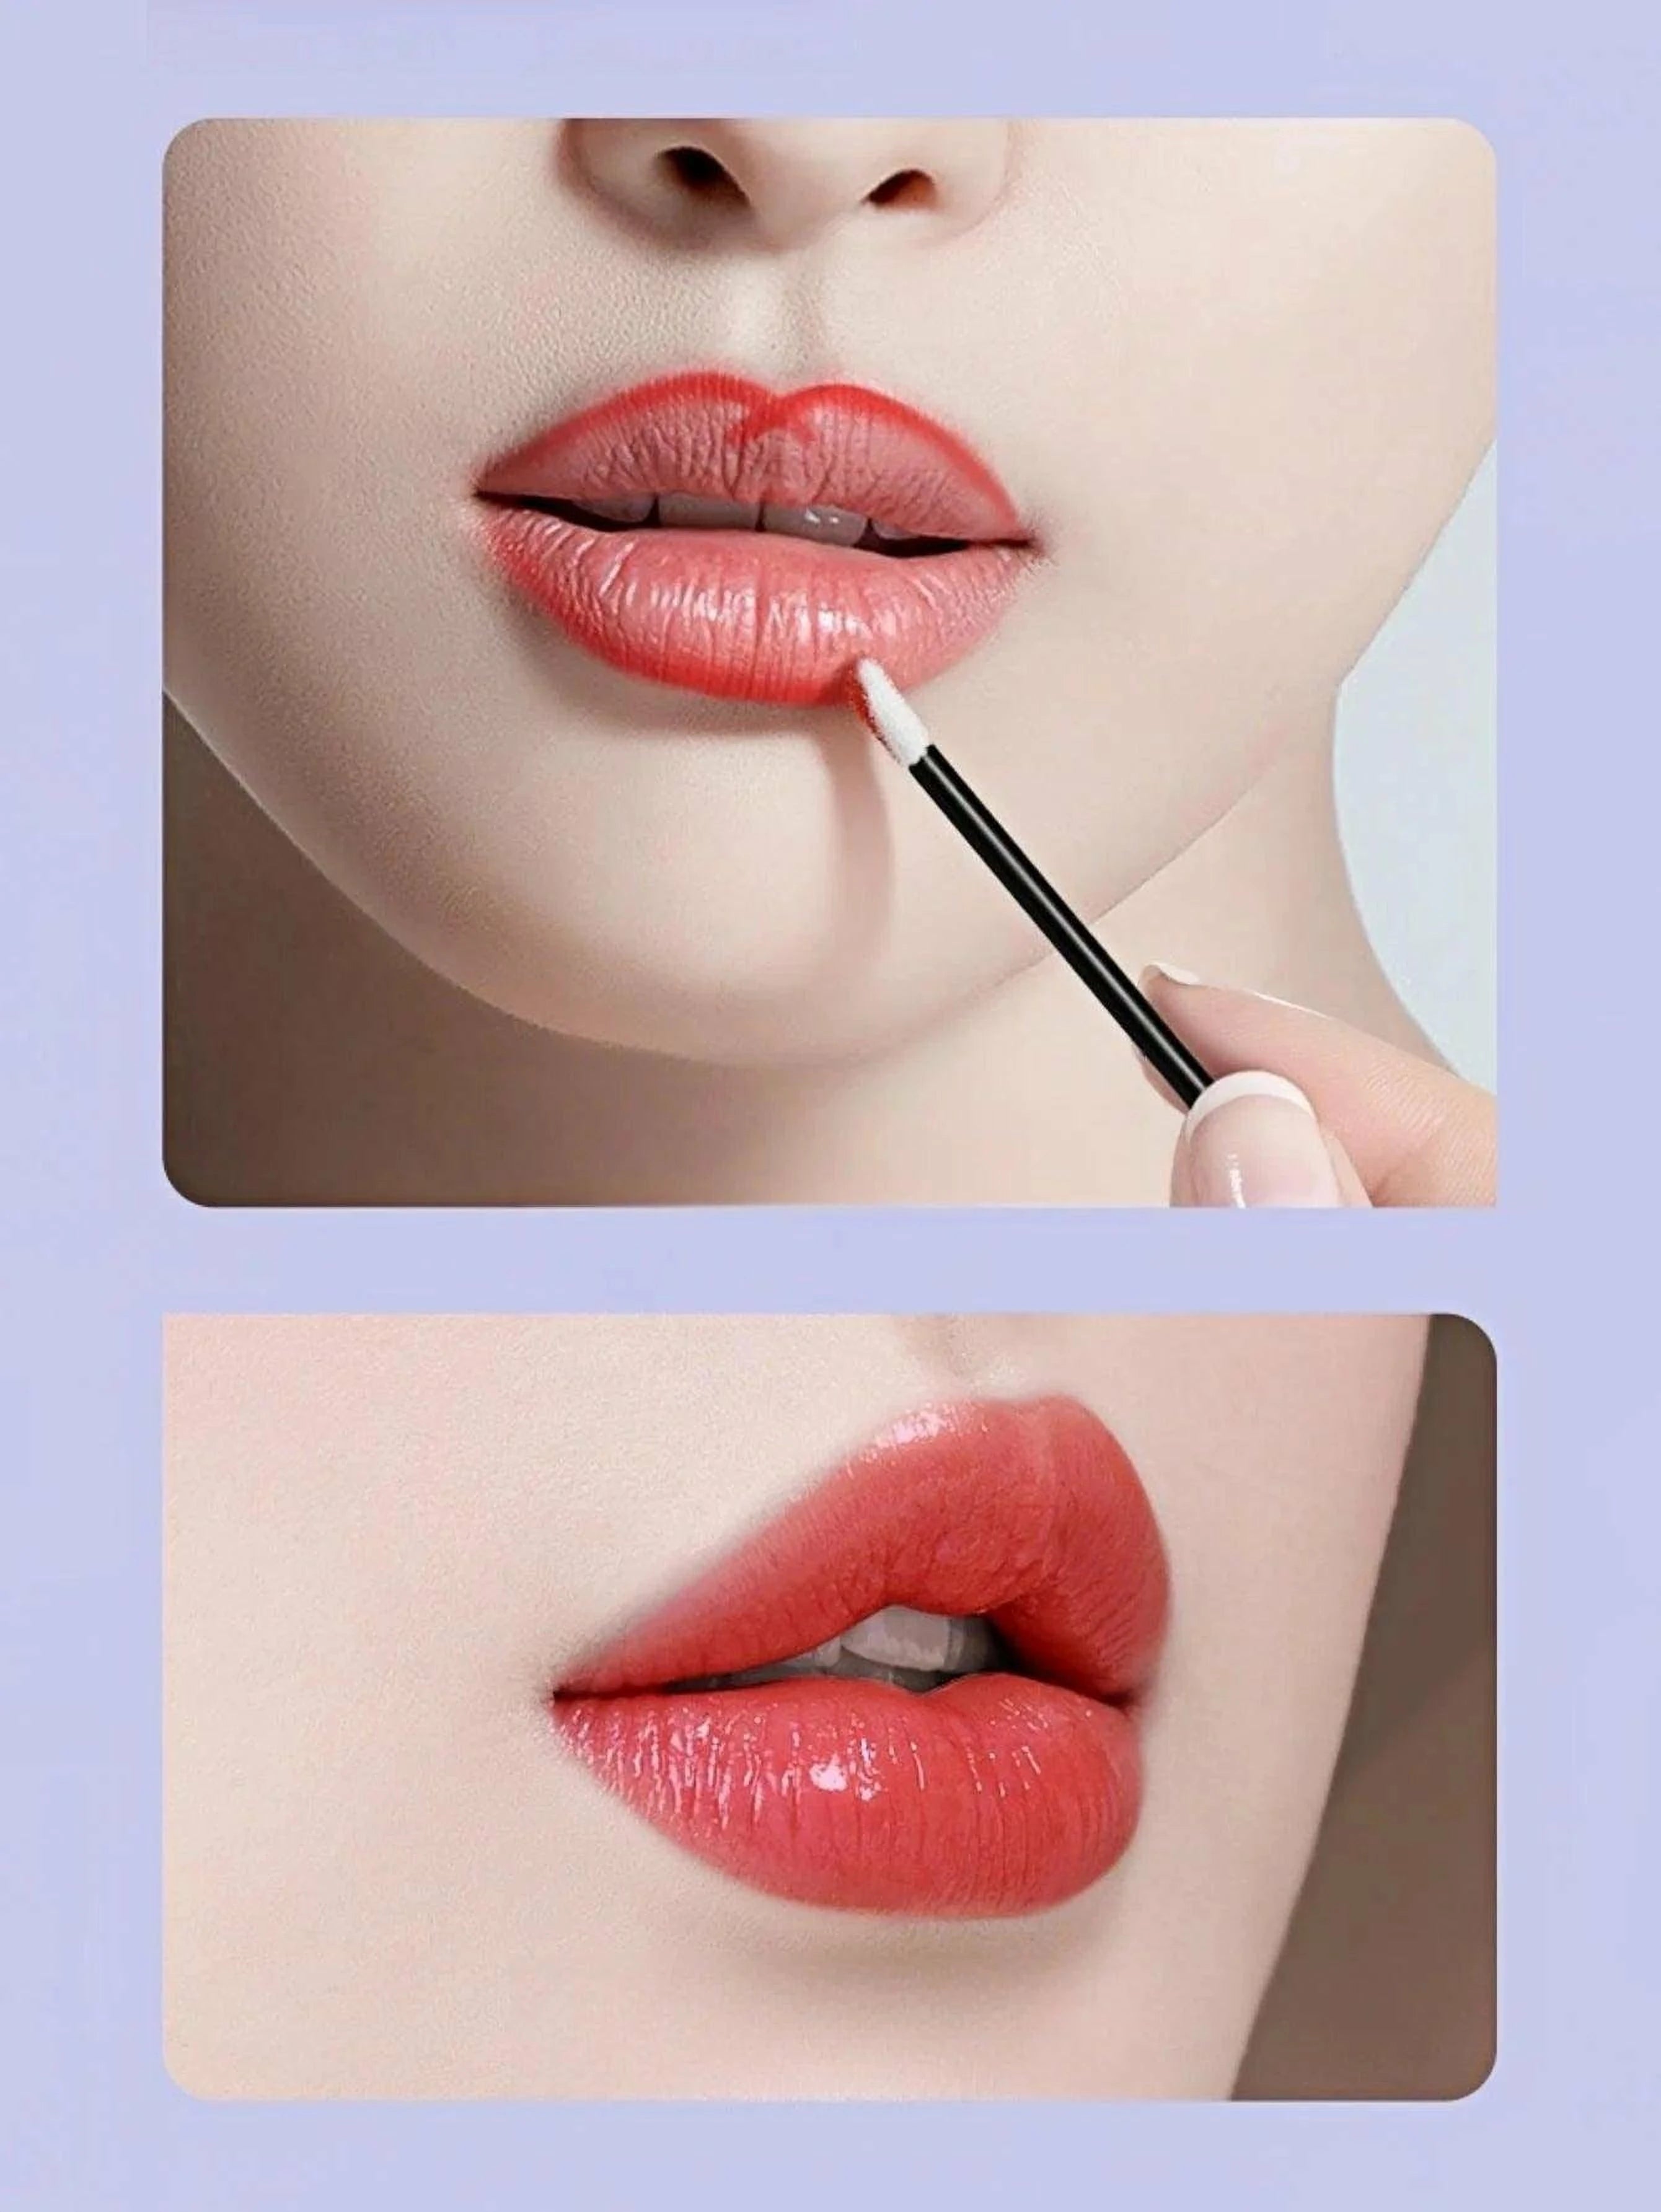 100 Disposable Lip Brushes: For makeup application.